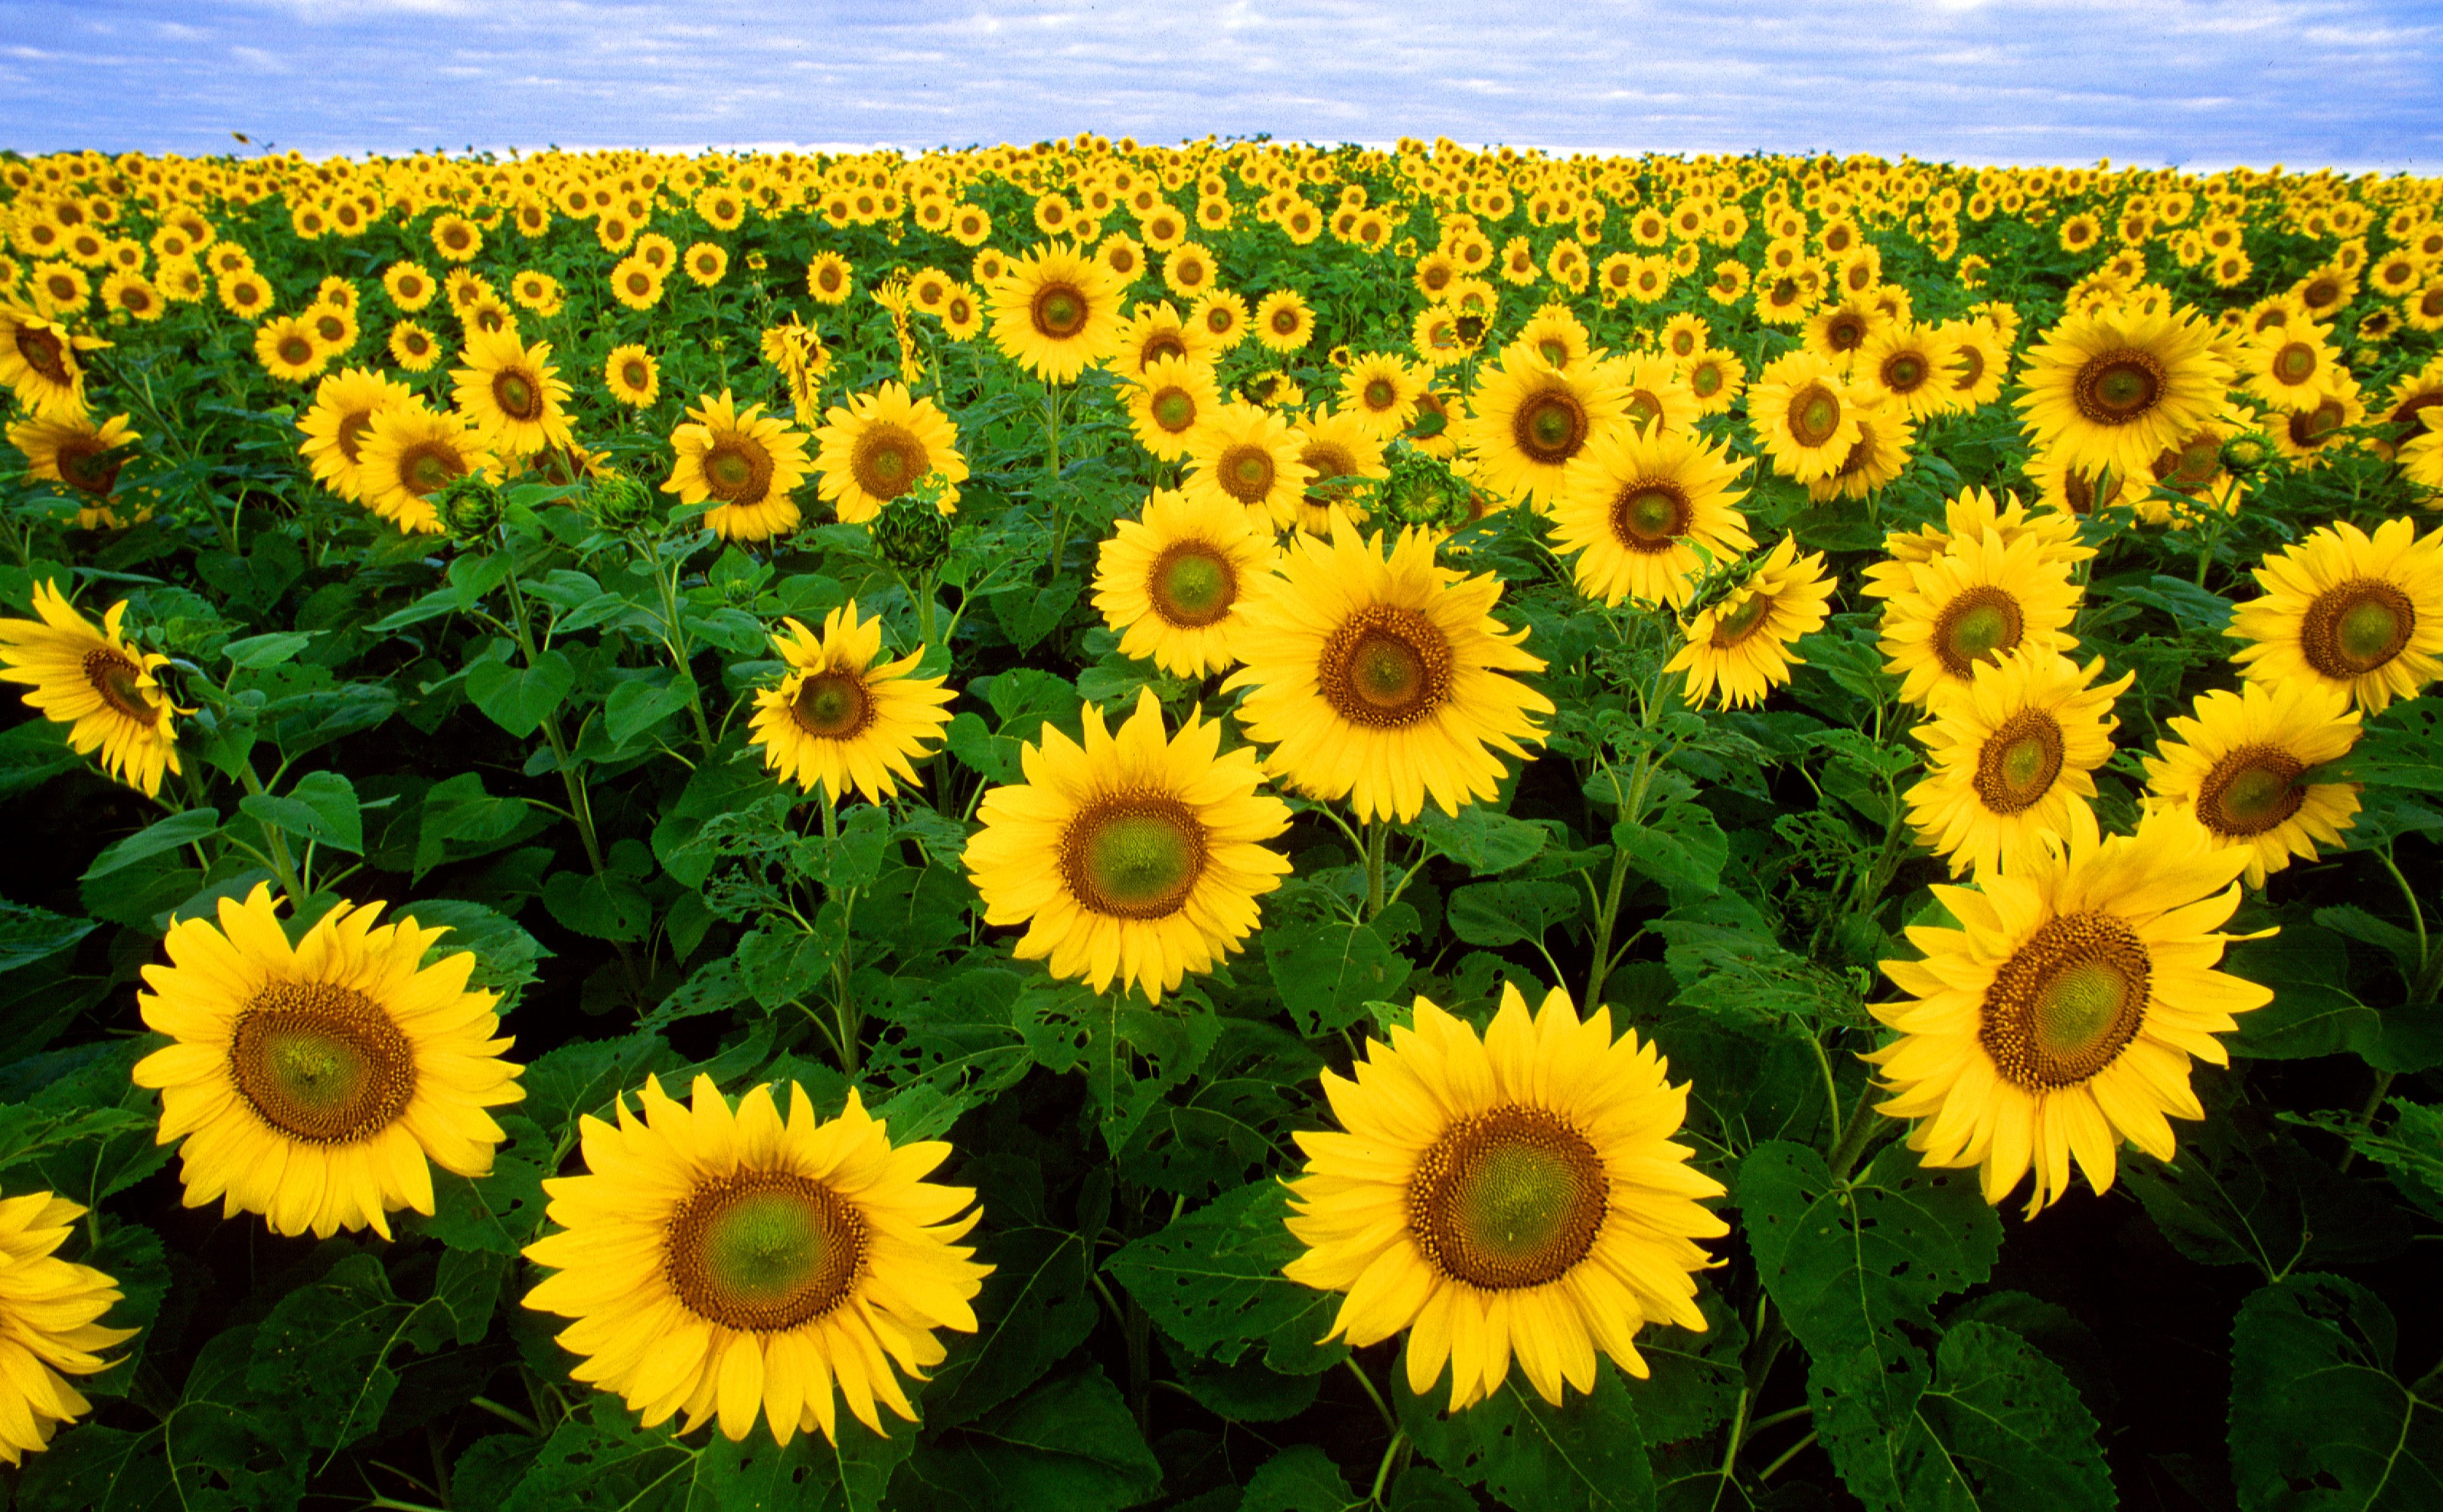 A very large field planted with sunflowers.